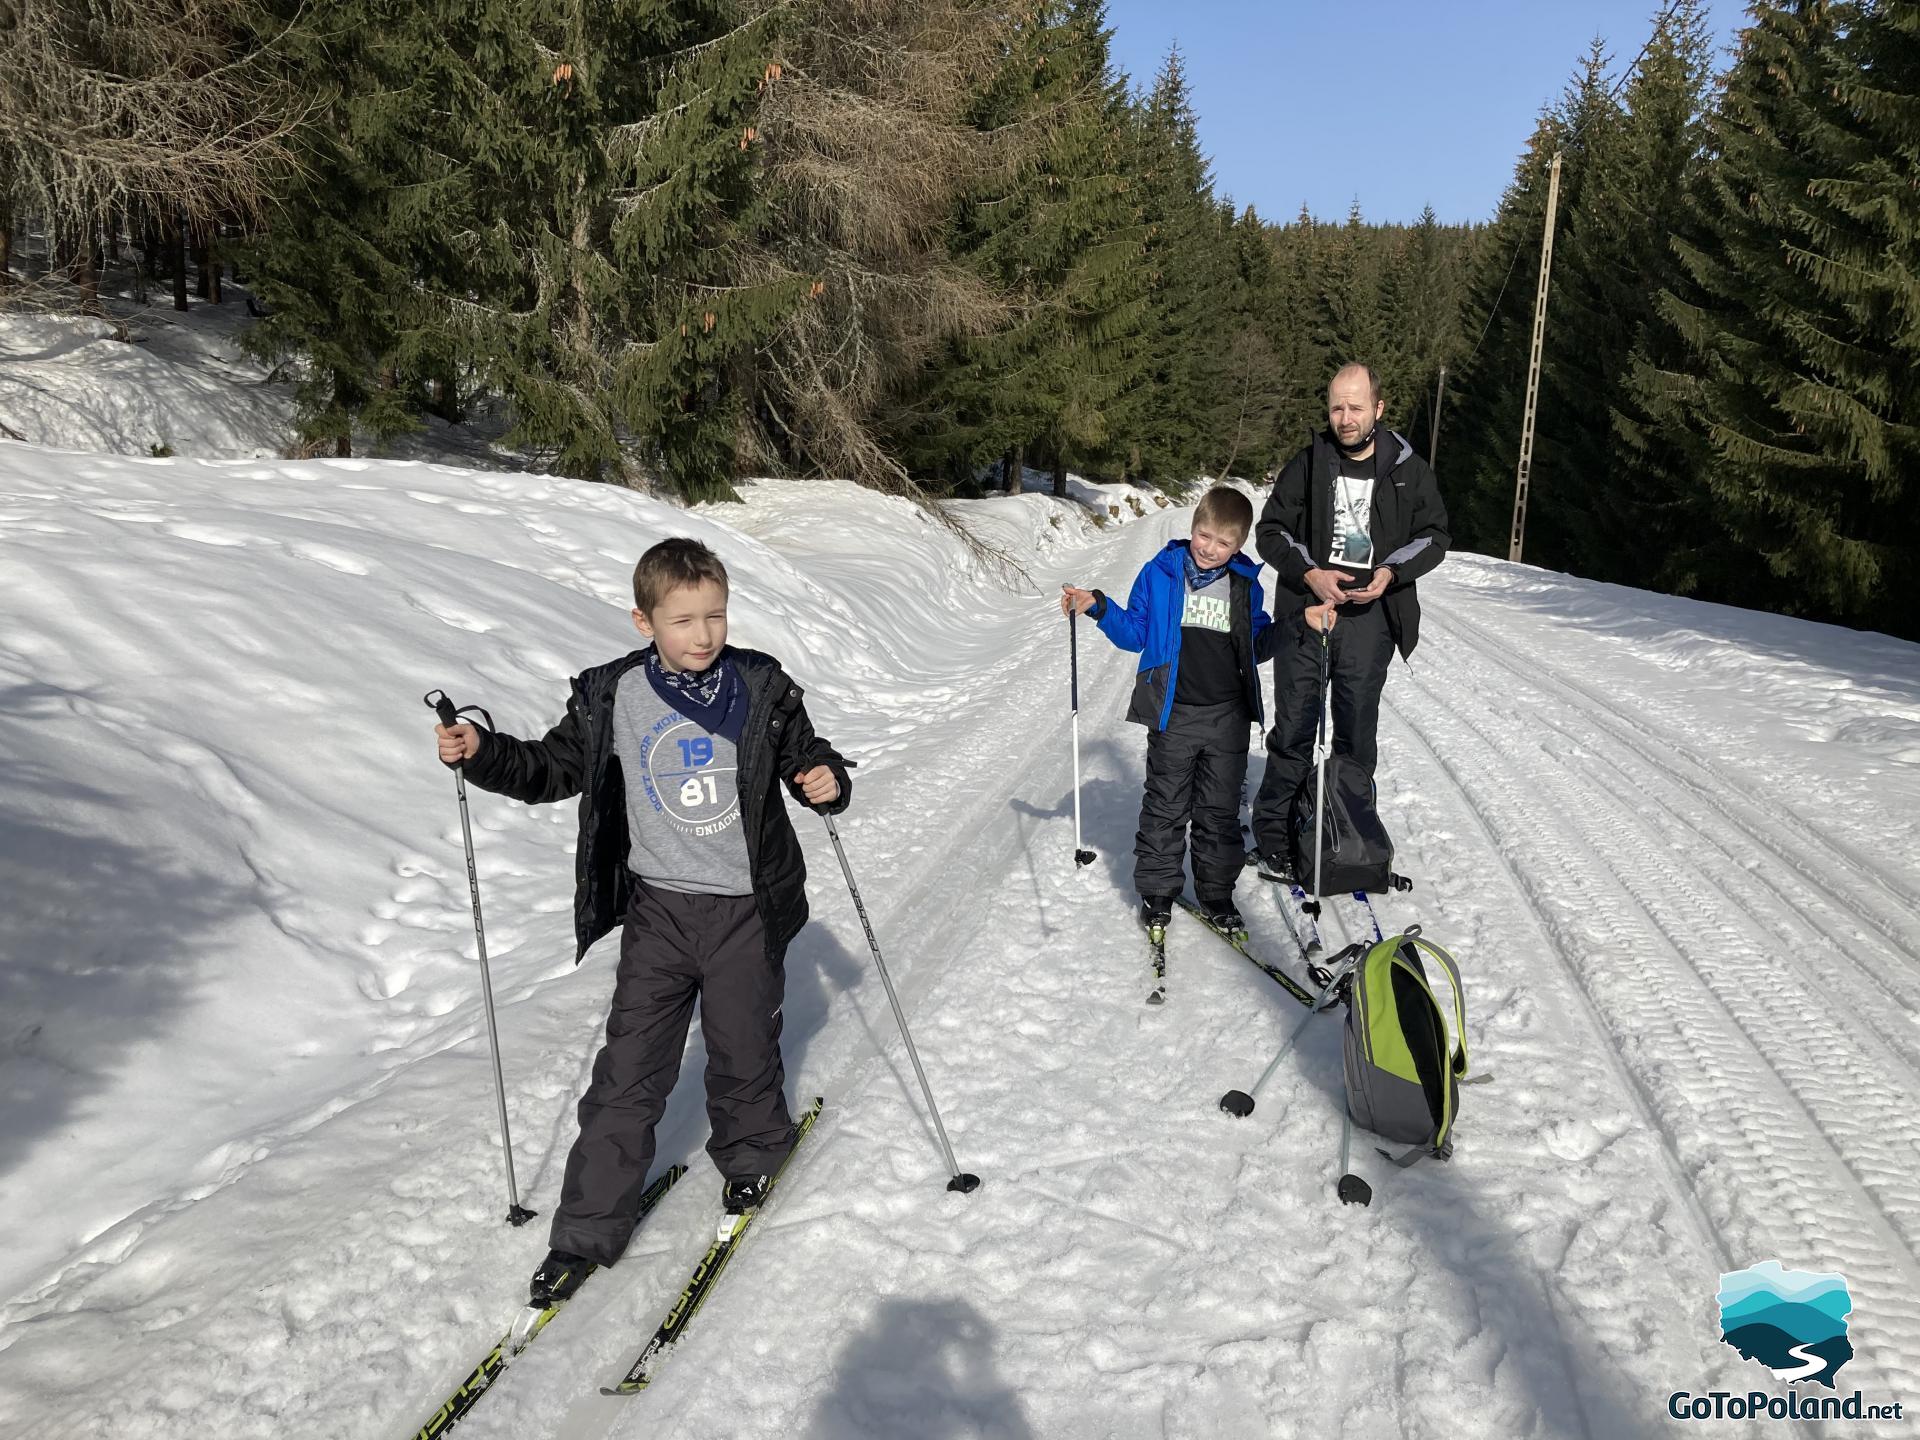 Sunny weather, on the trail two boys and a man cross country skiing 